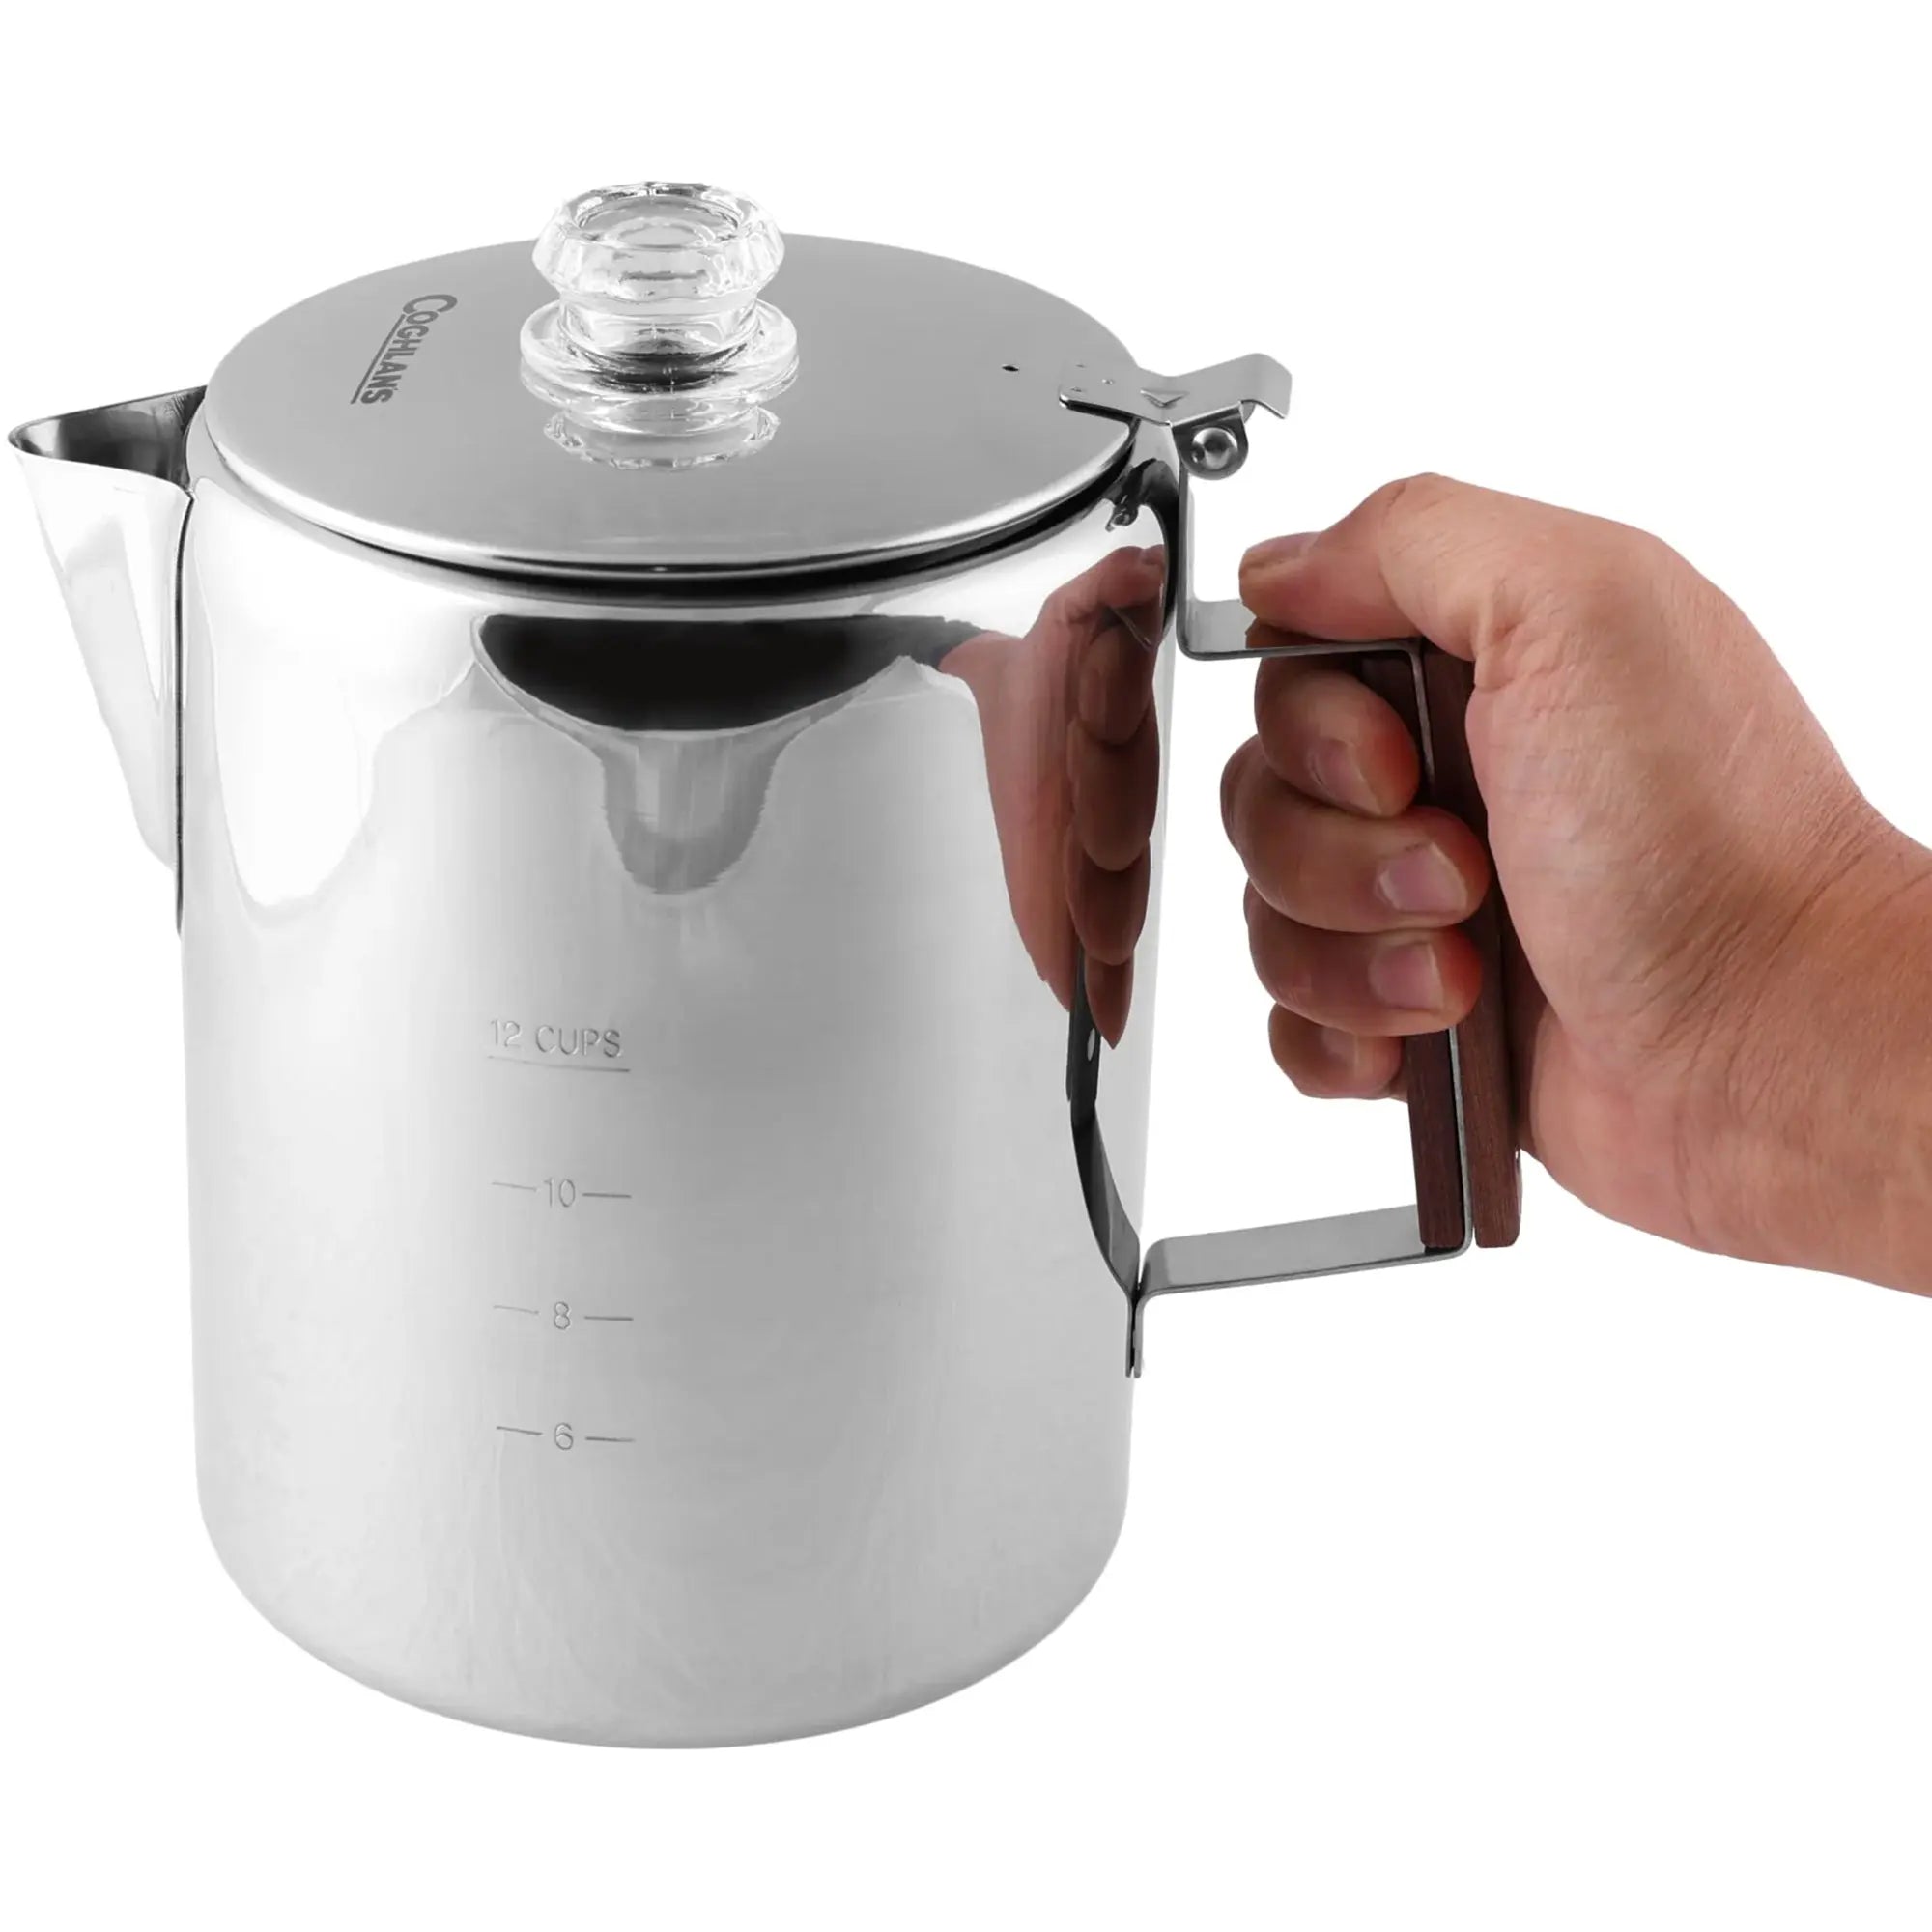 Coghlan's 12-Cup Stainless Steel Coffee Pot Coghlan's